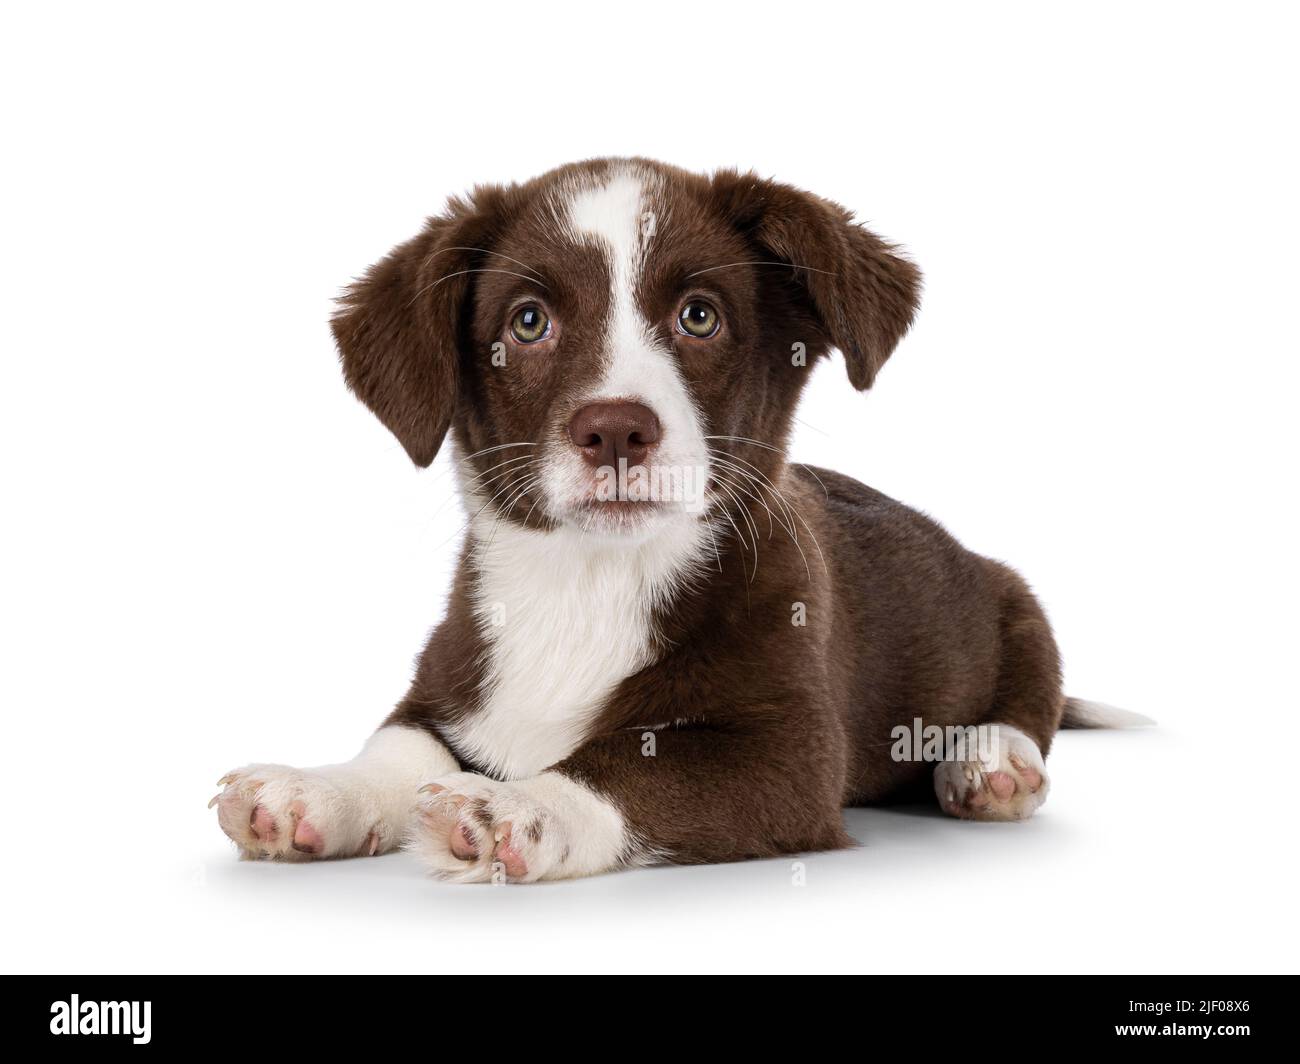 Cute brown with white Welsh Corgi Cardigan dog pup, laying down facing front.  Looking towards camera. Isolated on a white background. Stock Photo